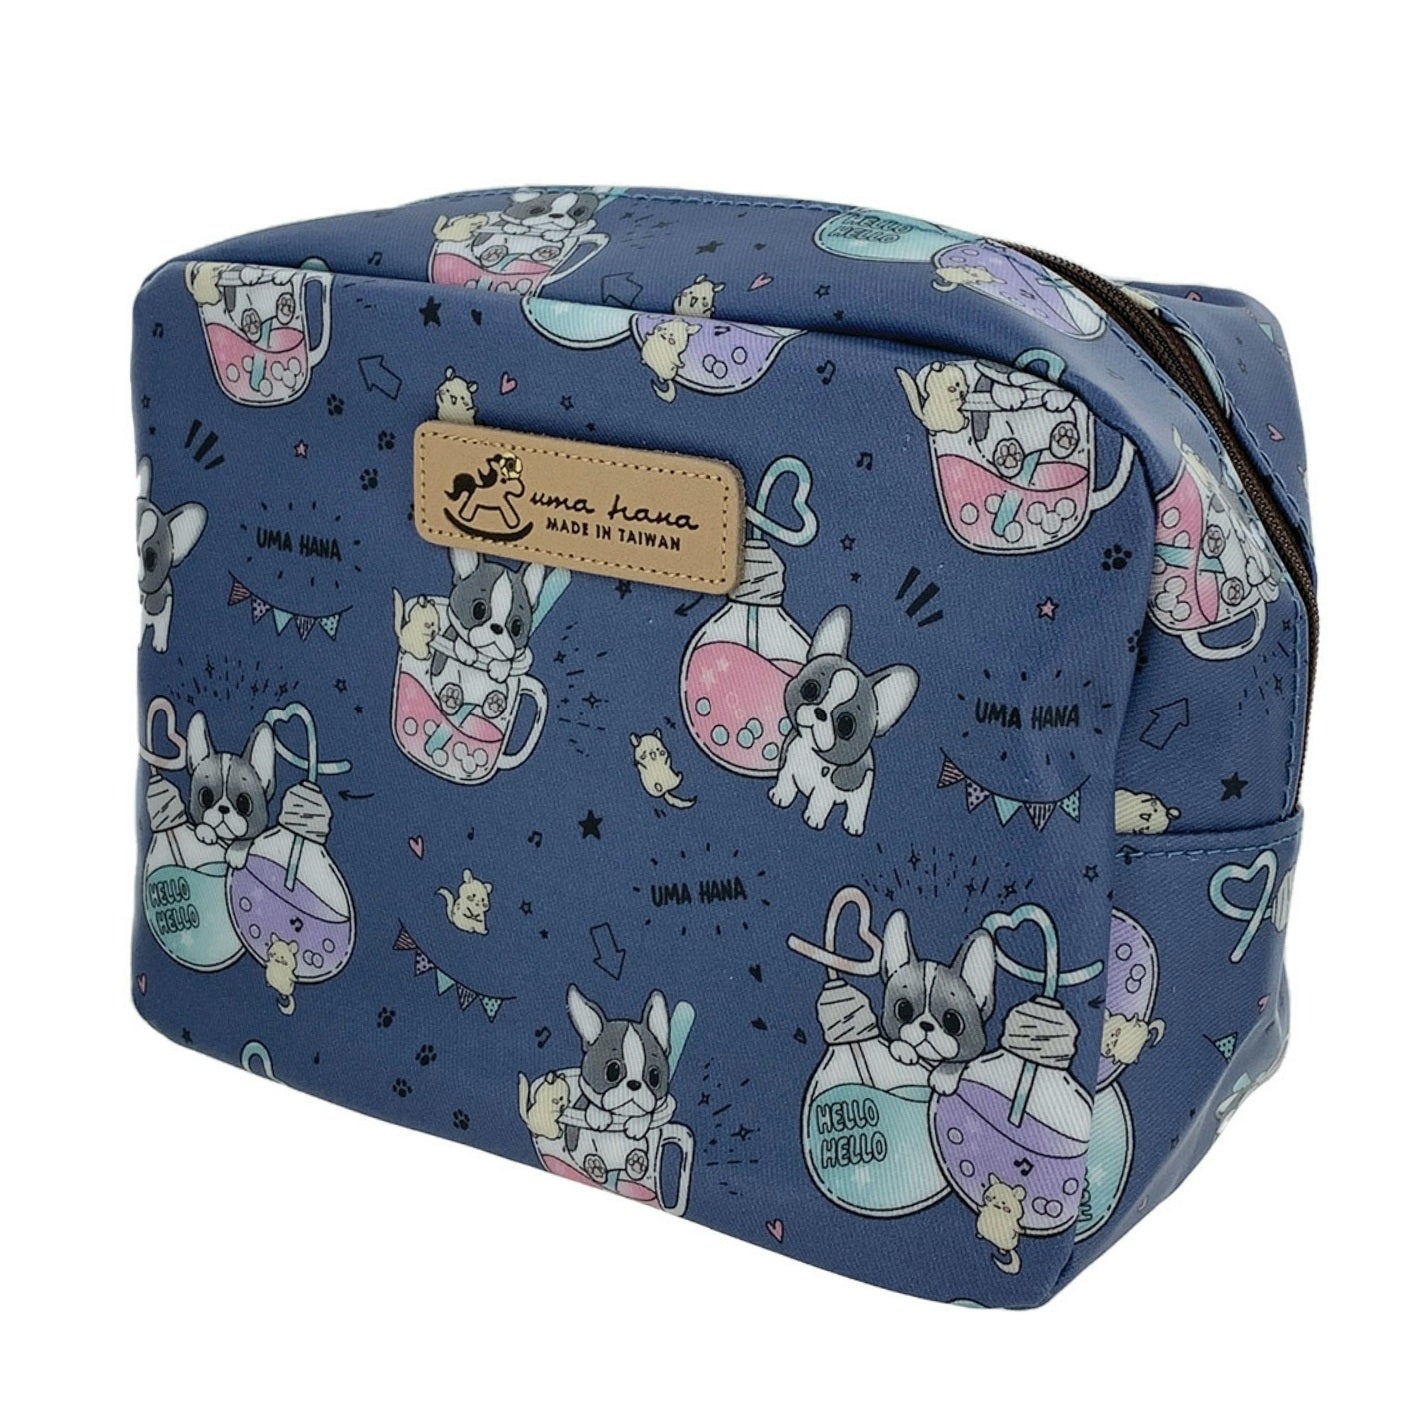 Blue Boba Frenchie Cube Cosmetic Bag